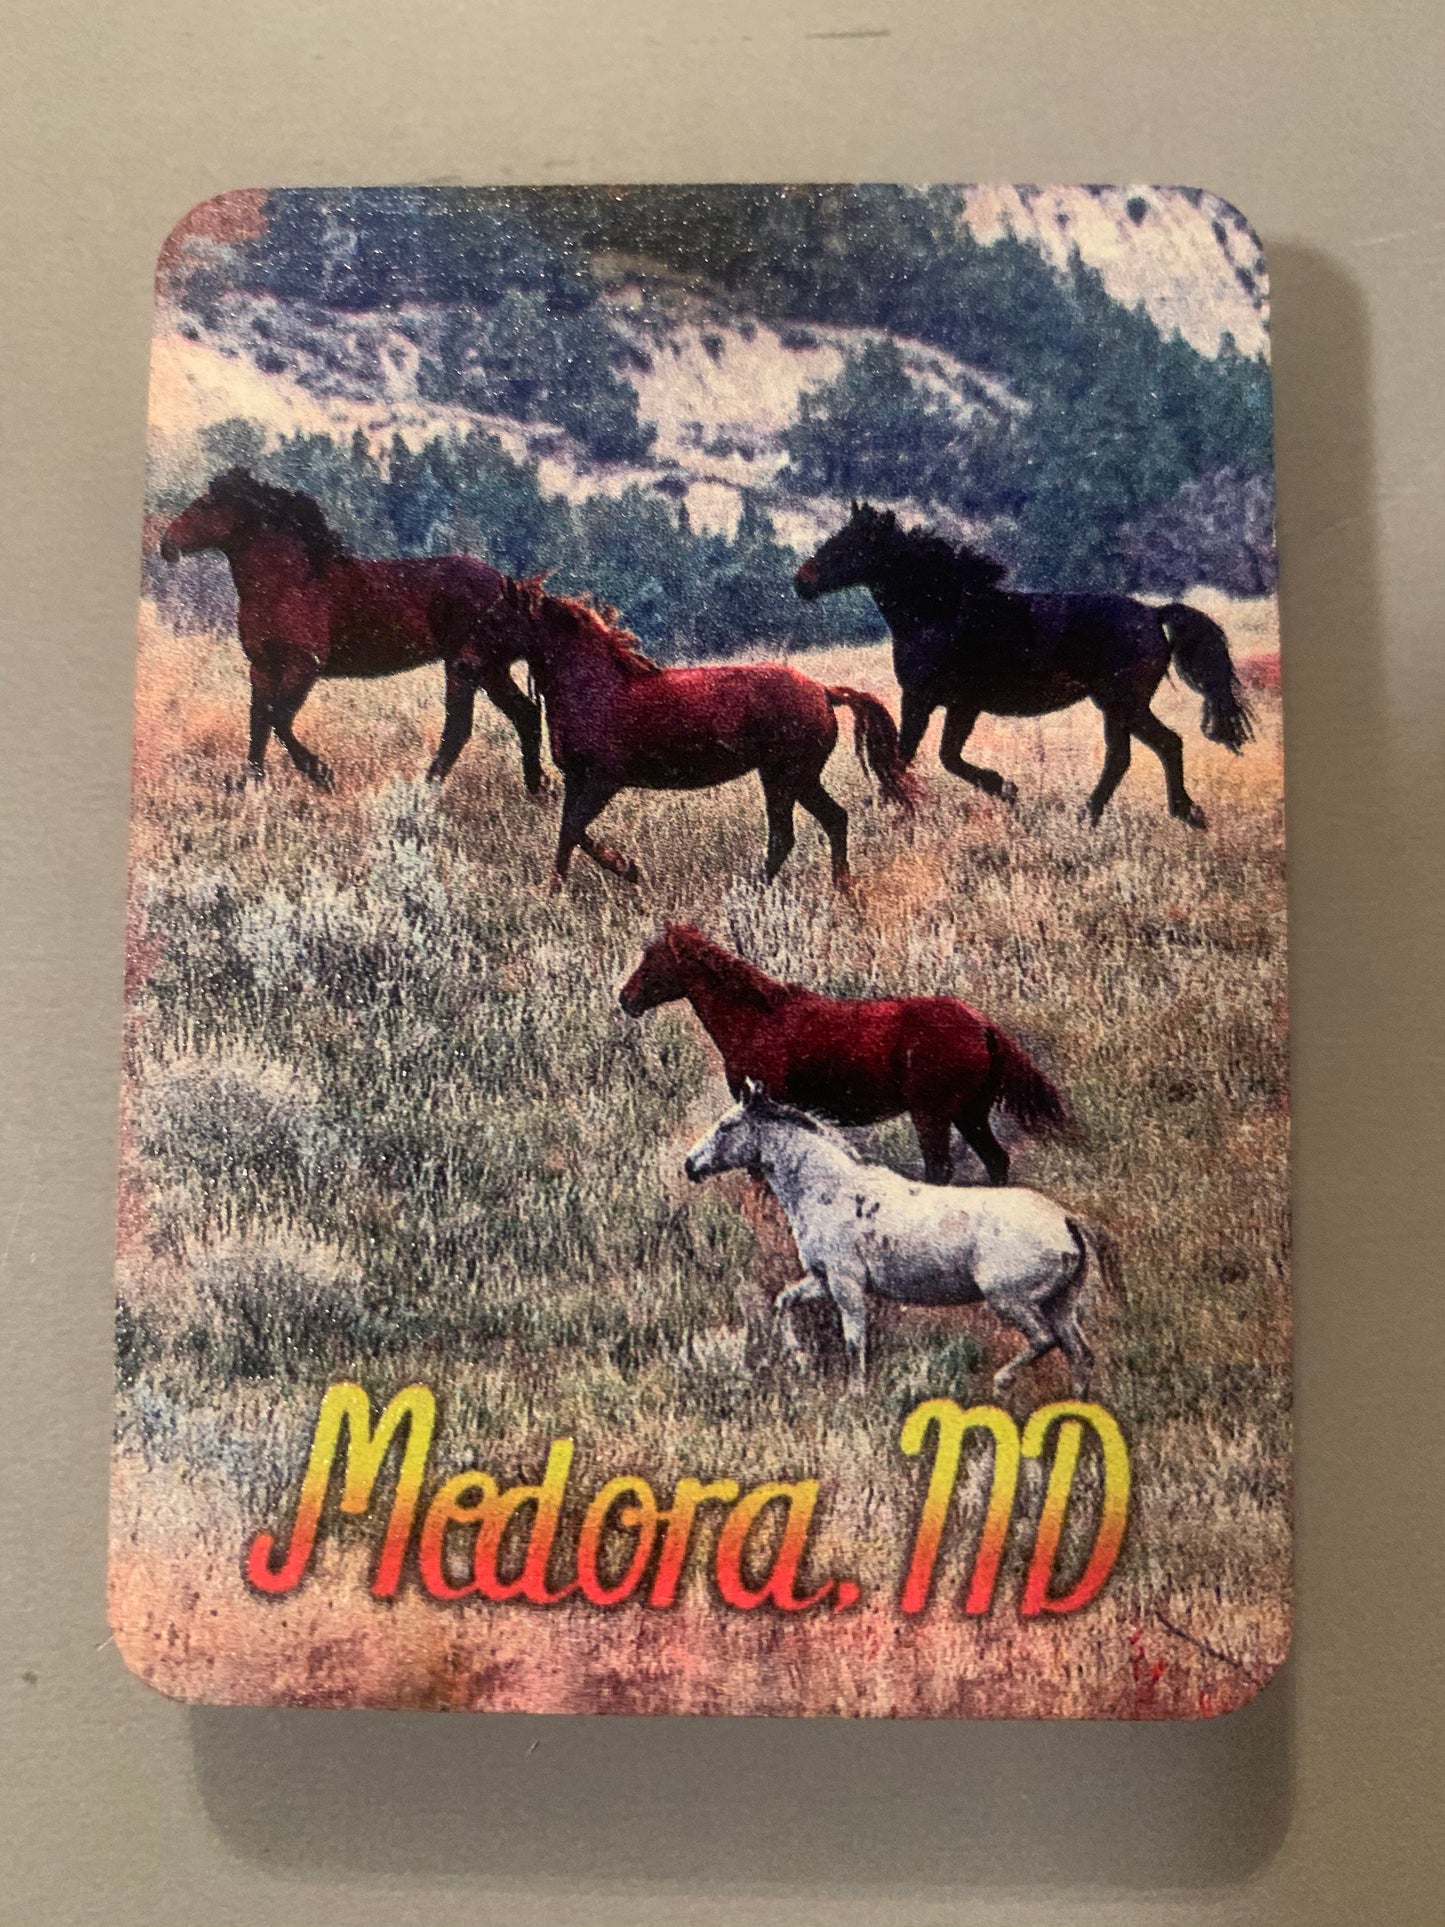 Magnet Chasing Horses 2 x 3 Magnets